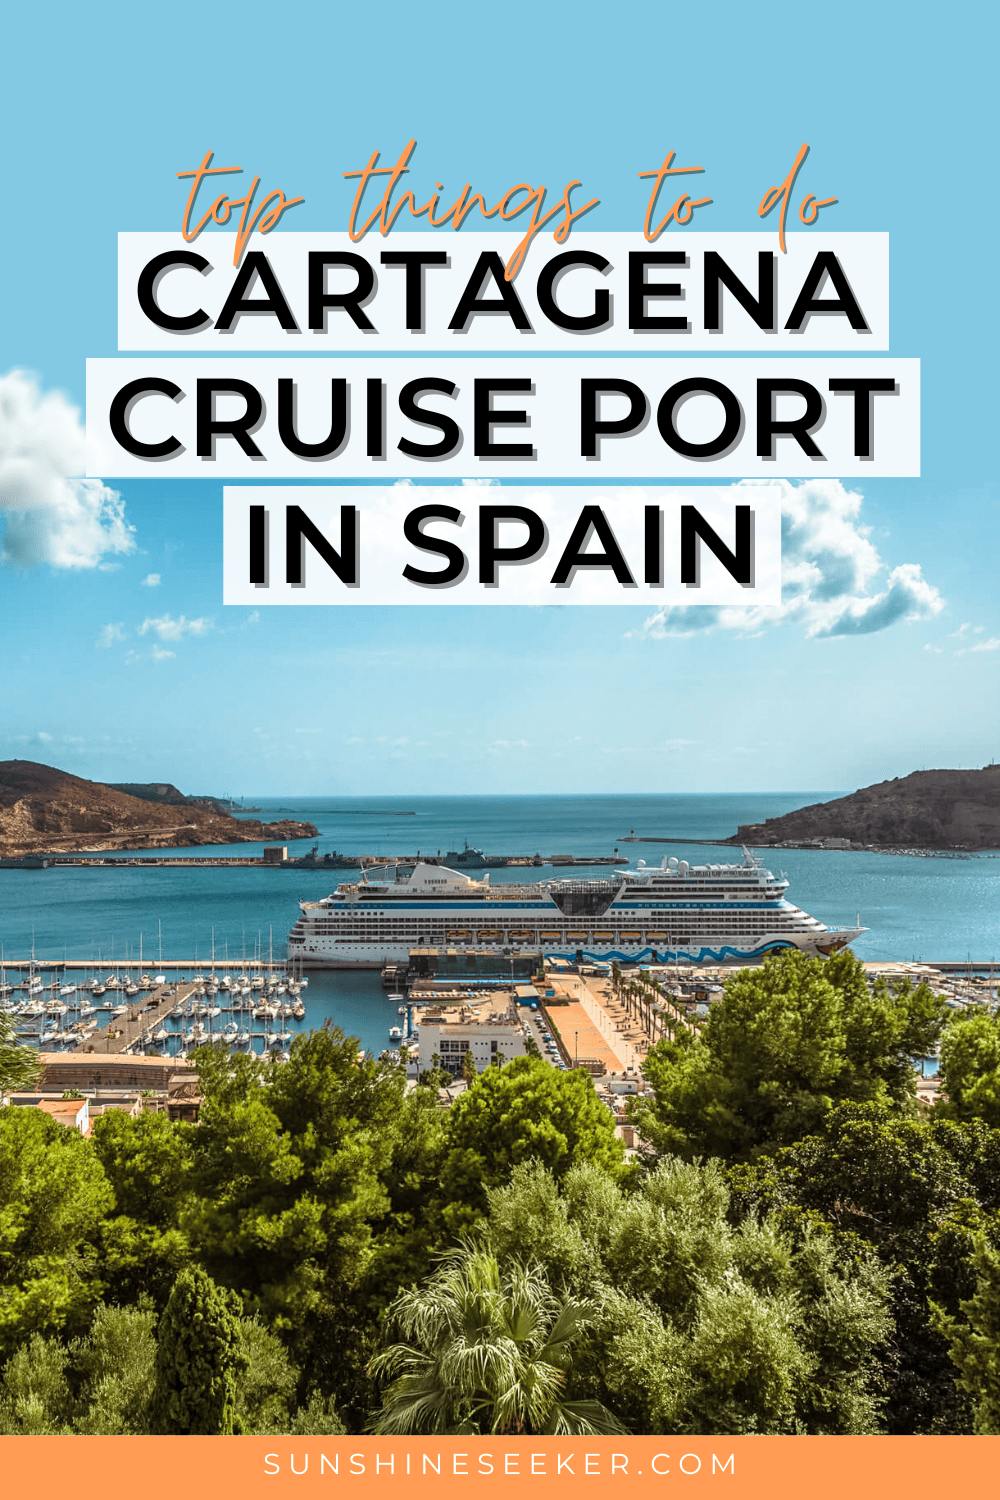 Don't miss the underrated city of Cartagena when you're in Spain. This is still a hidden gem often overlooked by international travelers. Discover all the best things to do in Cartagena and the top tours departing from the Cartagena Spain Cruise Port!